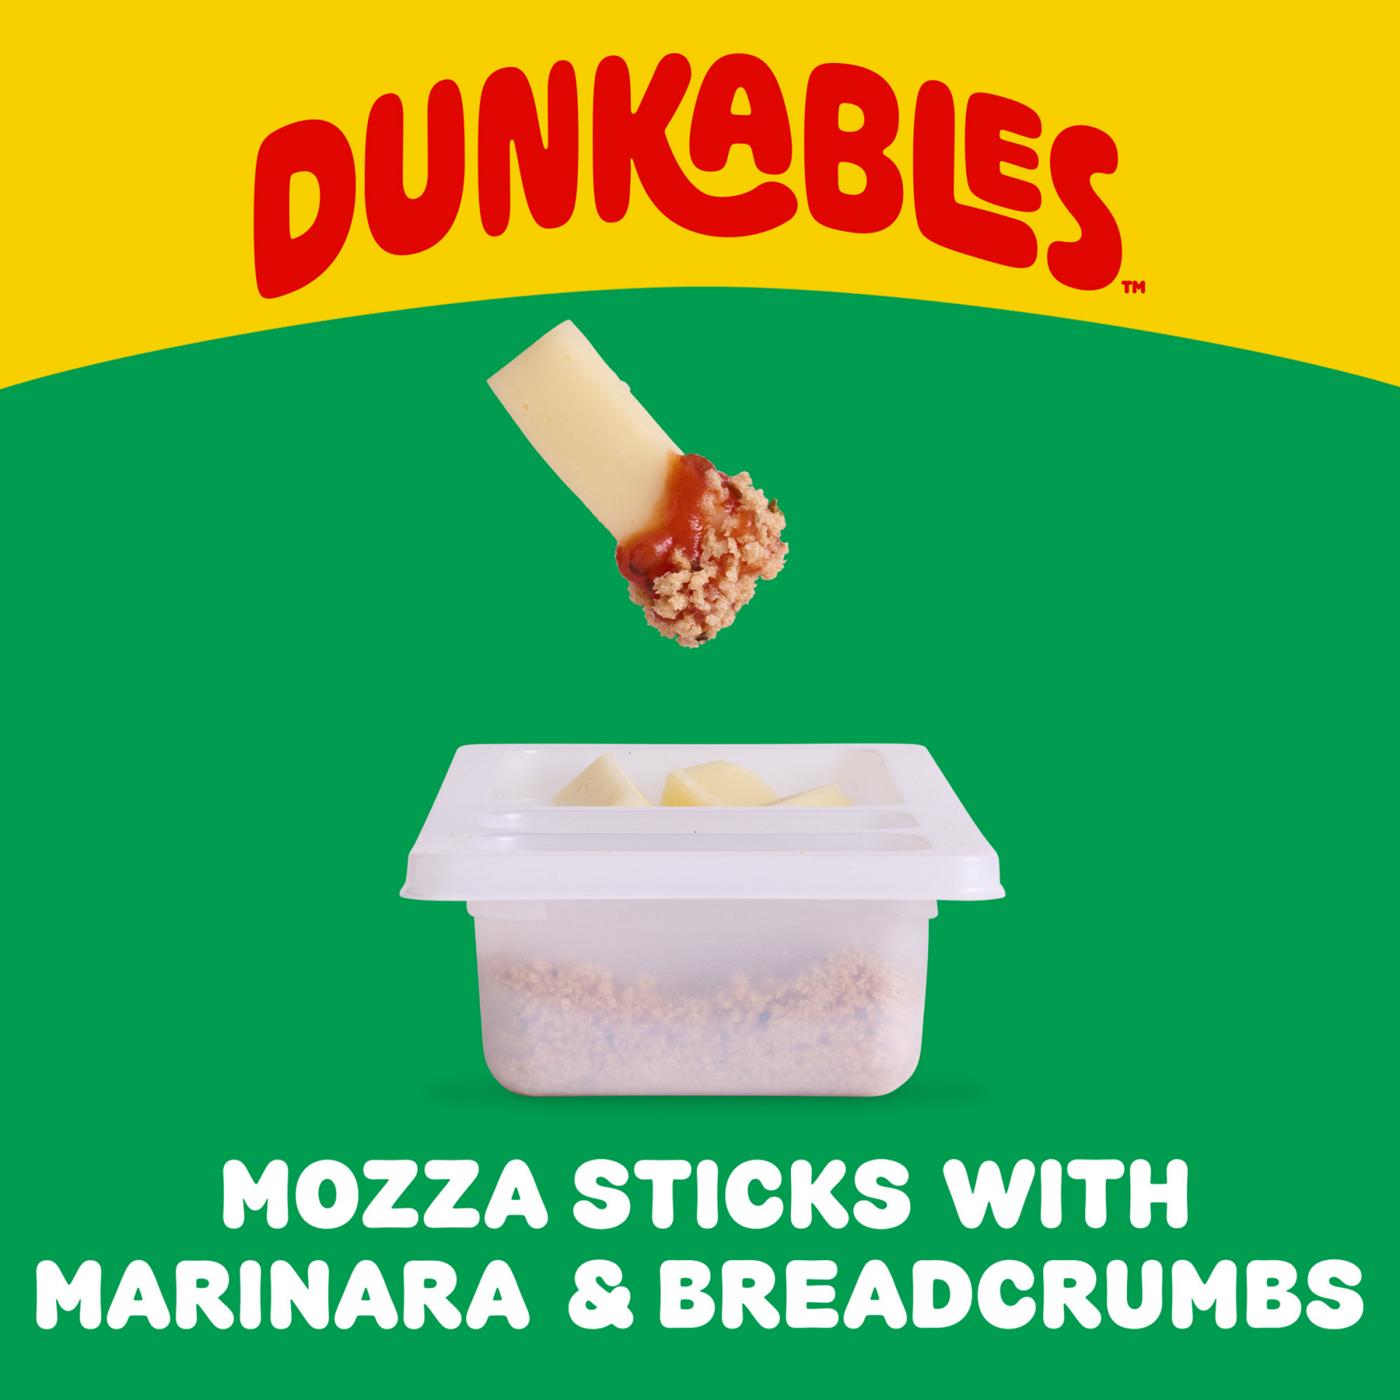 Lunchables Dunkables Snack Kit Tray - Mozza Sticks with Marinara & Breadcrumbs; image 6 of 8